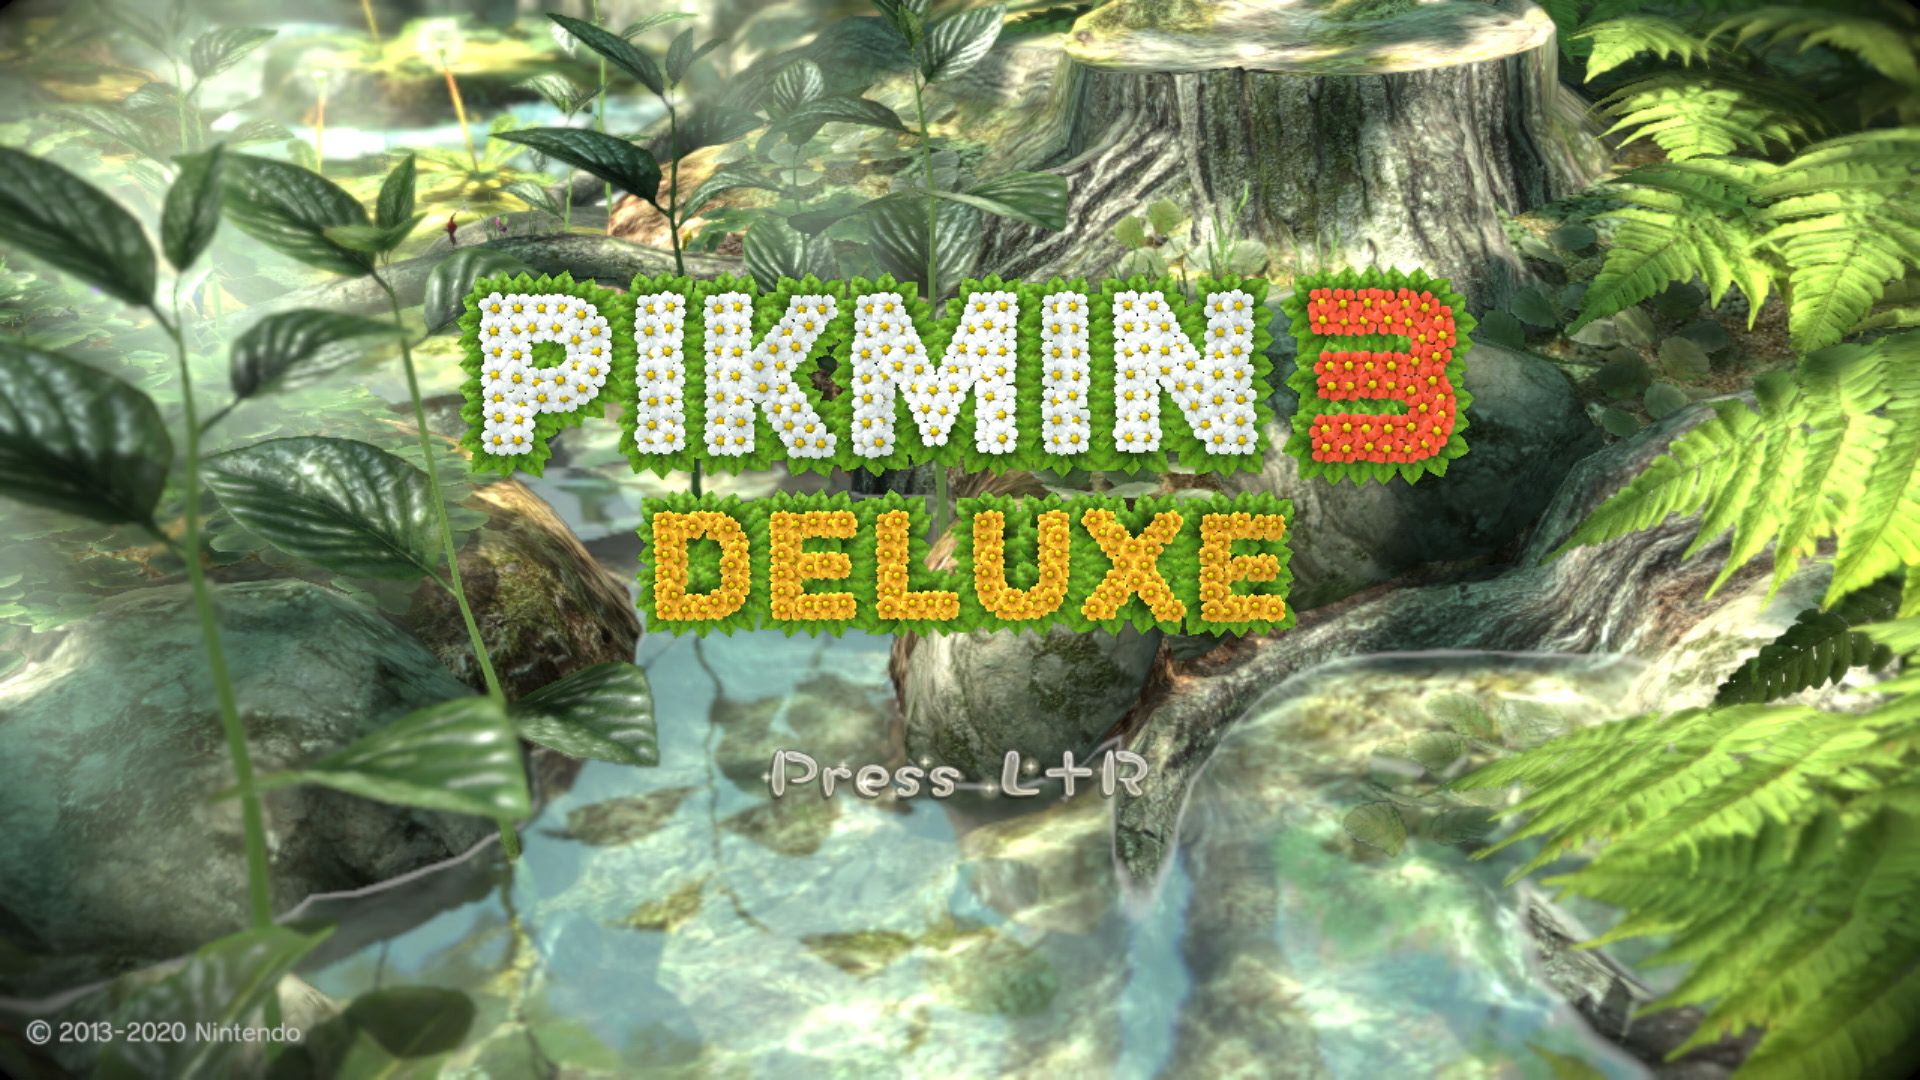 Gallery Pikmin 3 Deluxe Screenshots And Box Art